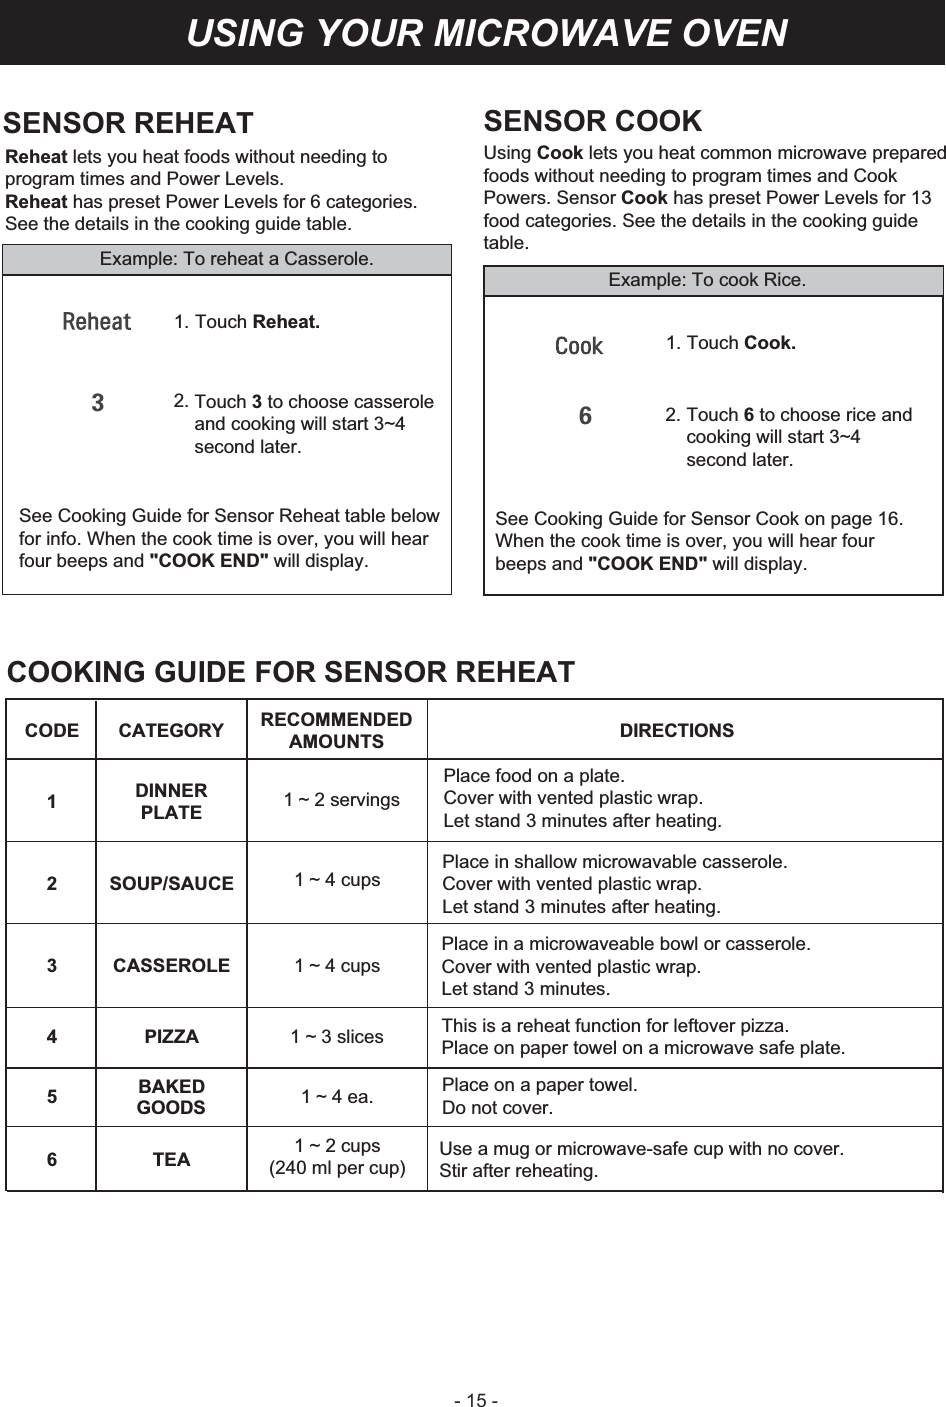 - 15 -1. Touch Cook.Example: To cook Rice.SENSOR COOKUsing Cook lets you heat common microwave preparedfoods without needing to program times and Cook Powers. Sensor Cook has preset Power Levels for 13 food categories. See the details in the cooking guide table.USING YOUR MICROWAVE OVEN1. Touch Reheat.Example: To reheat a Casserole.SENSOR REHEATReheat lets you heat foods without needing toprogram times and Power Levels.Reheat has preset Power Levels for 6 categories.See the details in the cooking guide table.COOKING GUIDE FOR SENSOR REHEAT1 ~ 4 ea. 1 ~ 2 cups(240 ml per cup)Use a mug or microwave-safe cup with no cover.Stir after reheating.CODE CATEGORY RECOMMENDED AMOUNTS  DIRECTIONS 1DINNER PLATE  1 ~ 2 servings Place food on a plate.Cover with vented plastic wrap.Let stand 3 minutes after heating.2 SOUP/SAUCE  1 ~ 4 cupsPlace in shallow microwavable casserole.Cover with vented plastic wrap.Let stand 3 minutes after heating.3 CASSEROLE  1 ~ 4 cupsPlace in a microwaveable bowl or casserole.Cover with vented plastic wrap.Let stand 3 minutes.4 PIZZA  1 ~ 3 slices This is a reheat function for leftover pizza. Place on paper towel on a microwave safe plate.5BAKED GOODS Place on a paper towel.Do not cover.6TEA See Cooking Guide for Sensor Reheat table belowfor info. When the cook time is over, you will hearfour beeps and &quot;COOK END&quot; will display.2. Touch 3 to choose casserole and cooking will start 3~4 second later.2. Touch 6 to choose rice and cooking will start 3~4 second later.See Cooking Guide for Sensor Cook on page 16.When the cook time is over, you will hear fourbeeps and &quot;COOK END&quot; will display.36